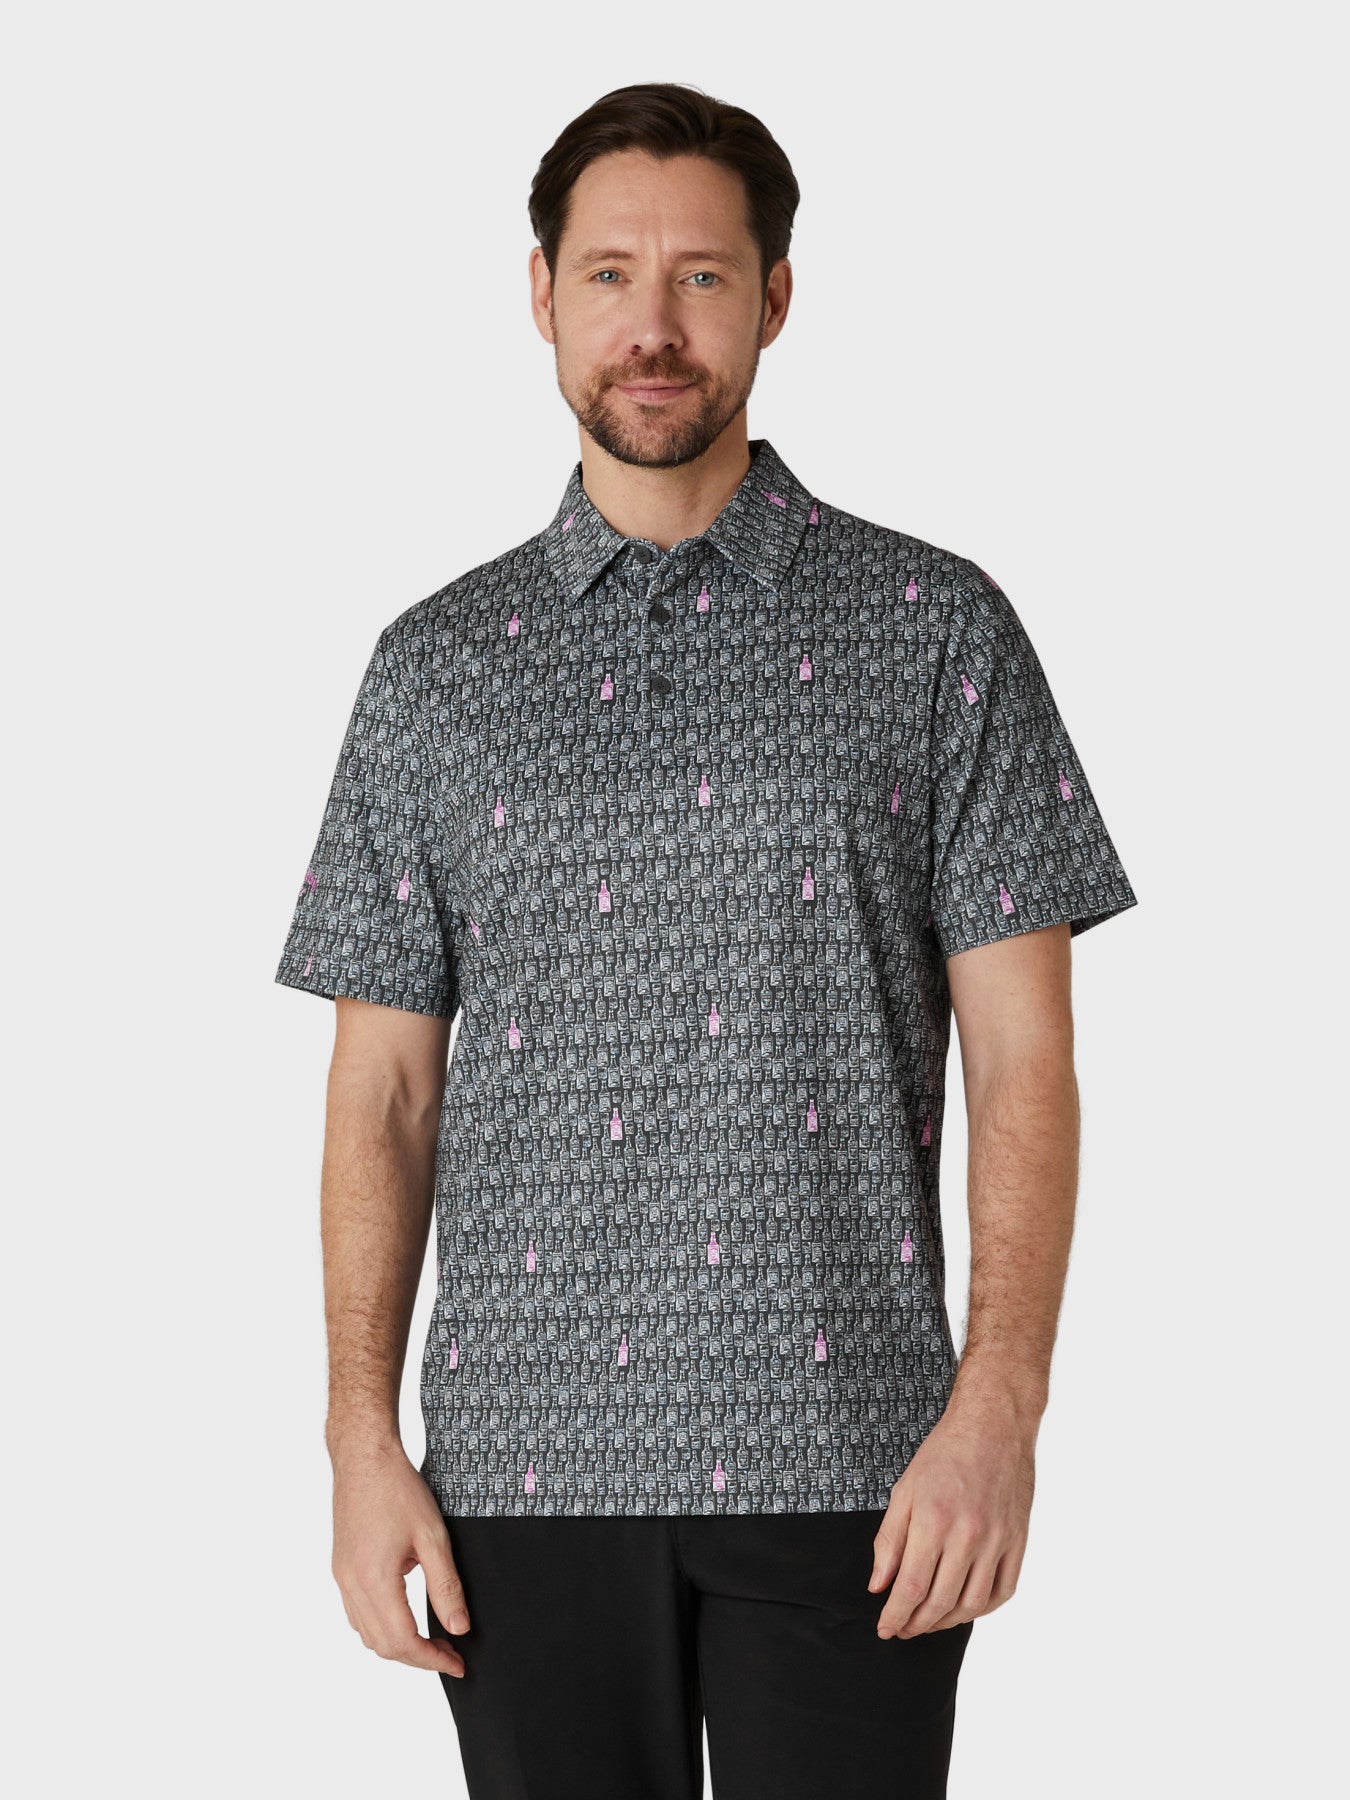 View Short Sleeve All Over Scotch Novelty Print Polo Shirt In Asphalt information